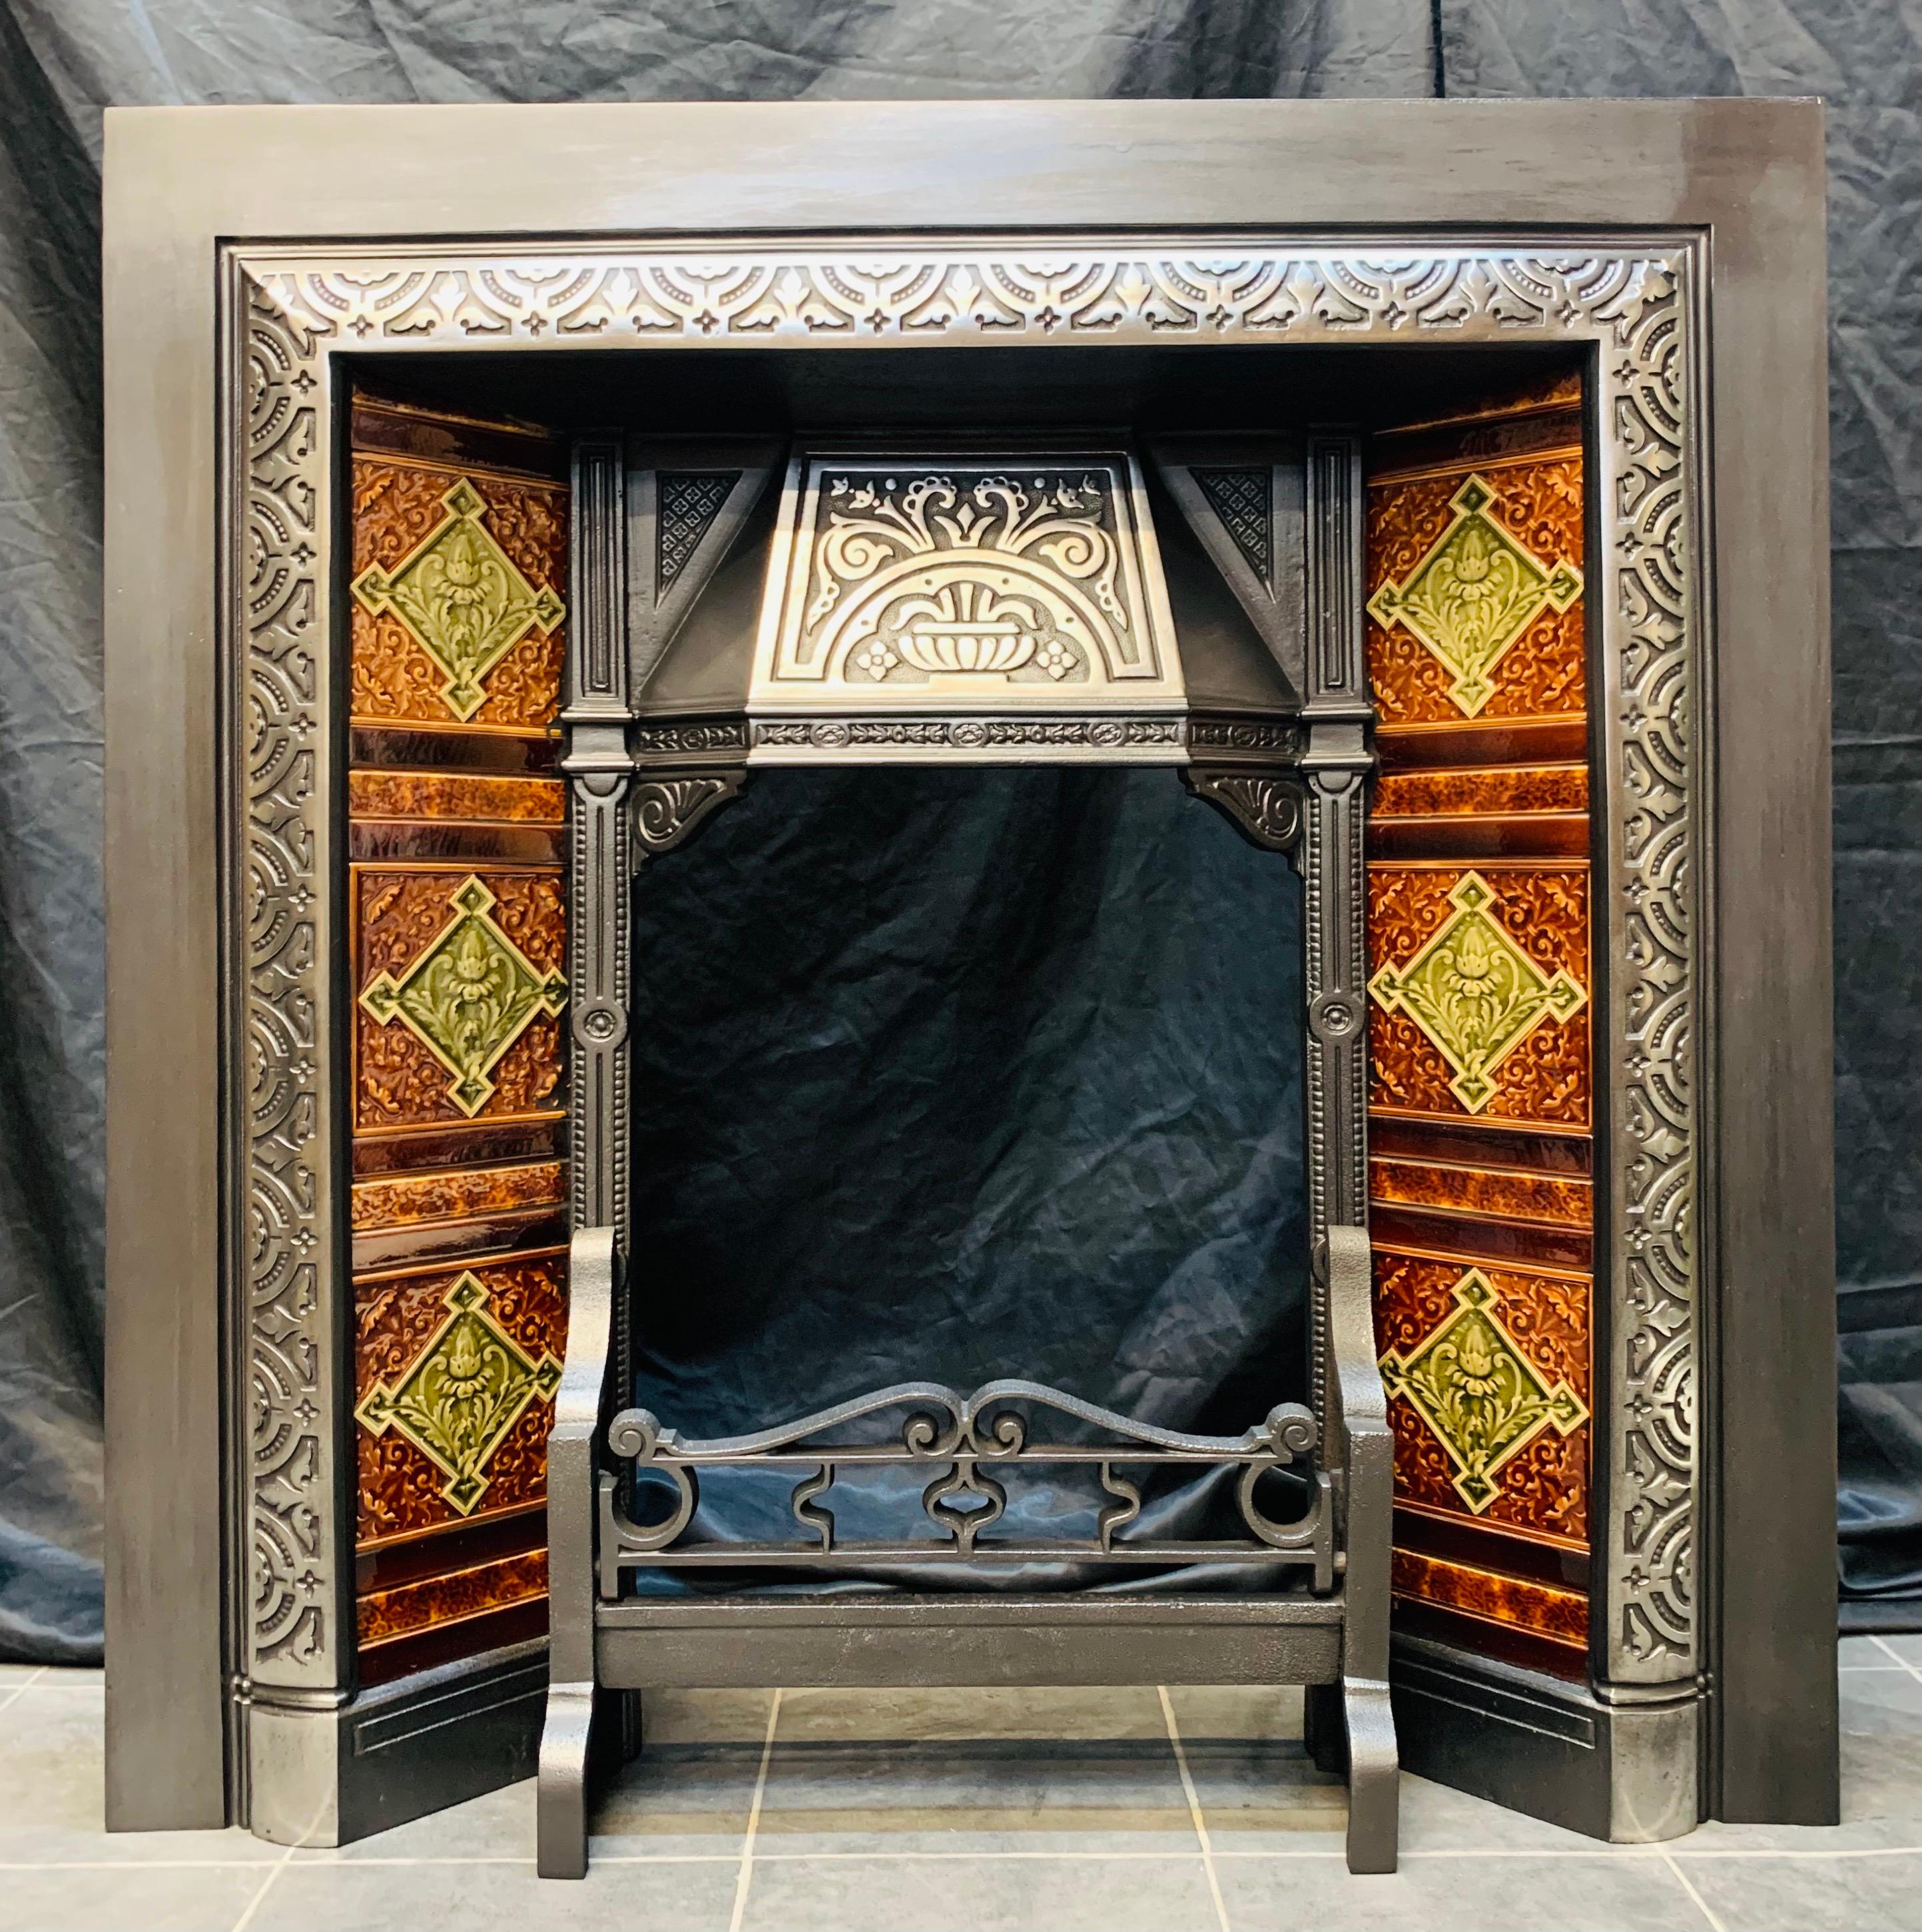 An attractive 19th century Scottish cast Iron fireplace insert with attractive thistle design tiles to the side sections, the canopy hood has been highlighted along with the raised border giving this piece a sense of vibrancy. 

Glasgow, Scotland